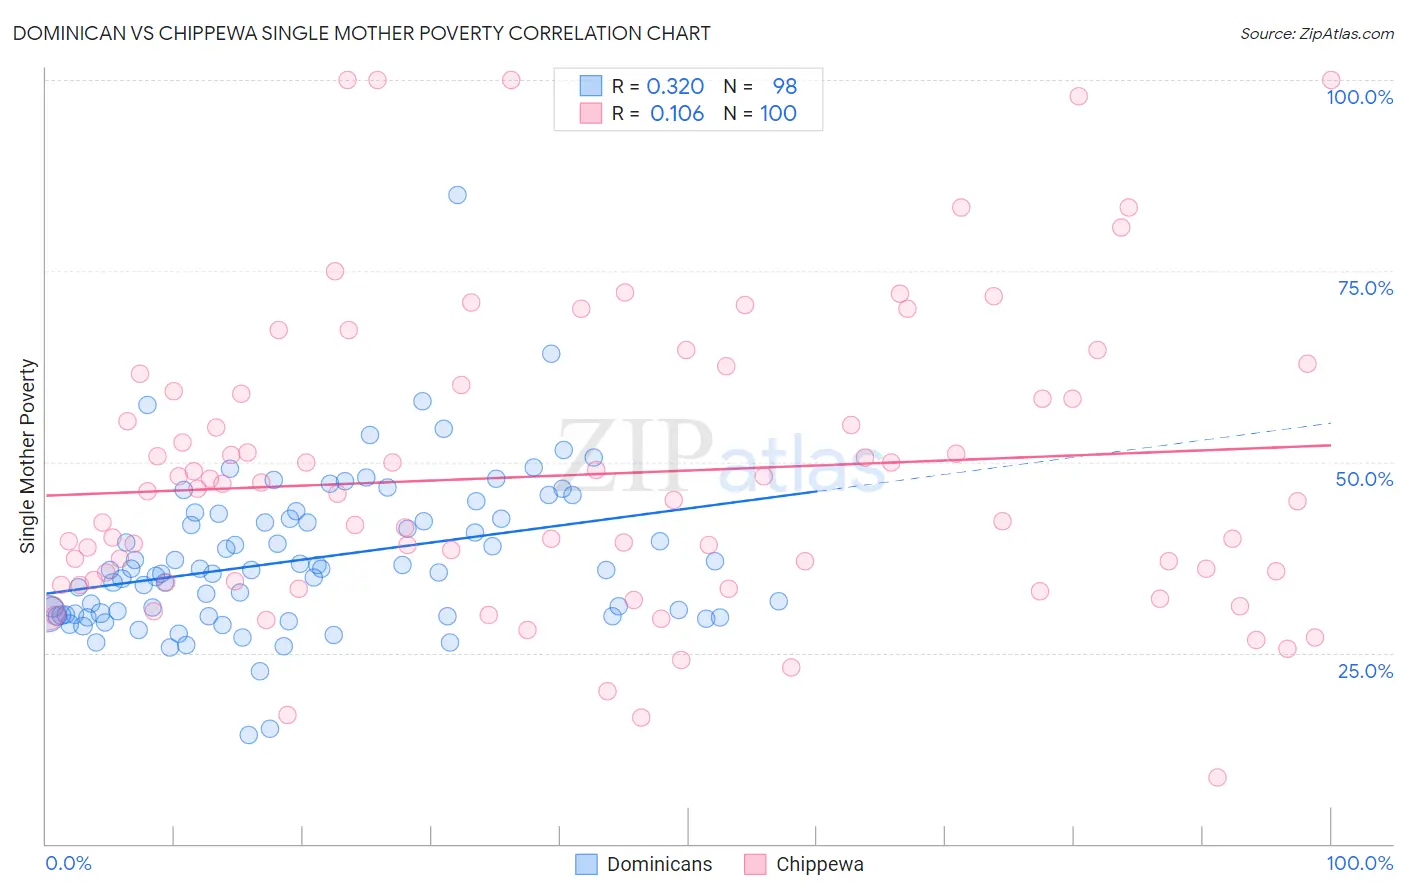 Dominican vs Chippewa Single Mother Poverty